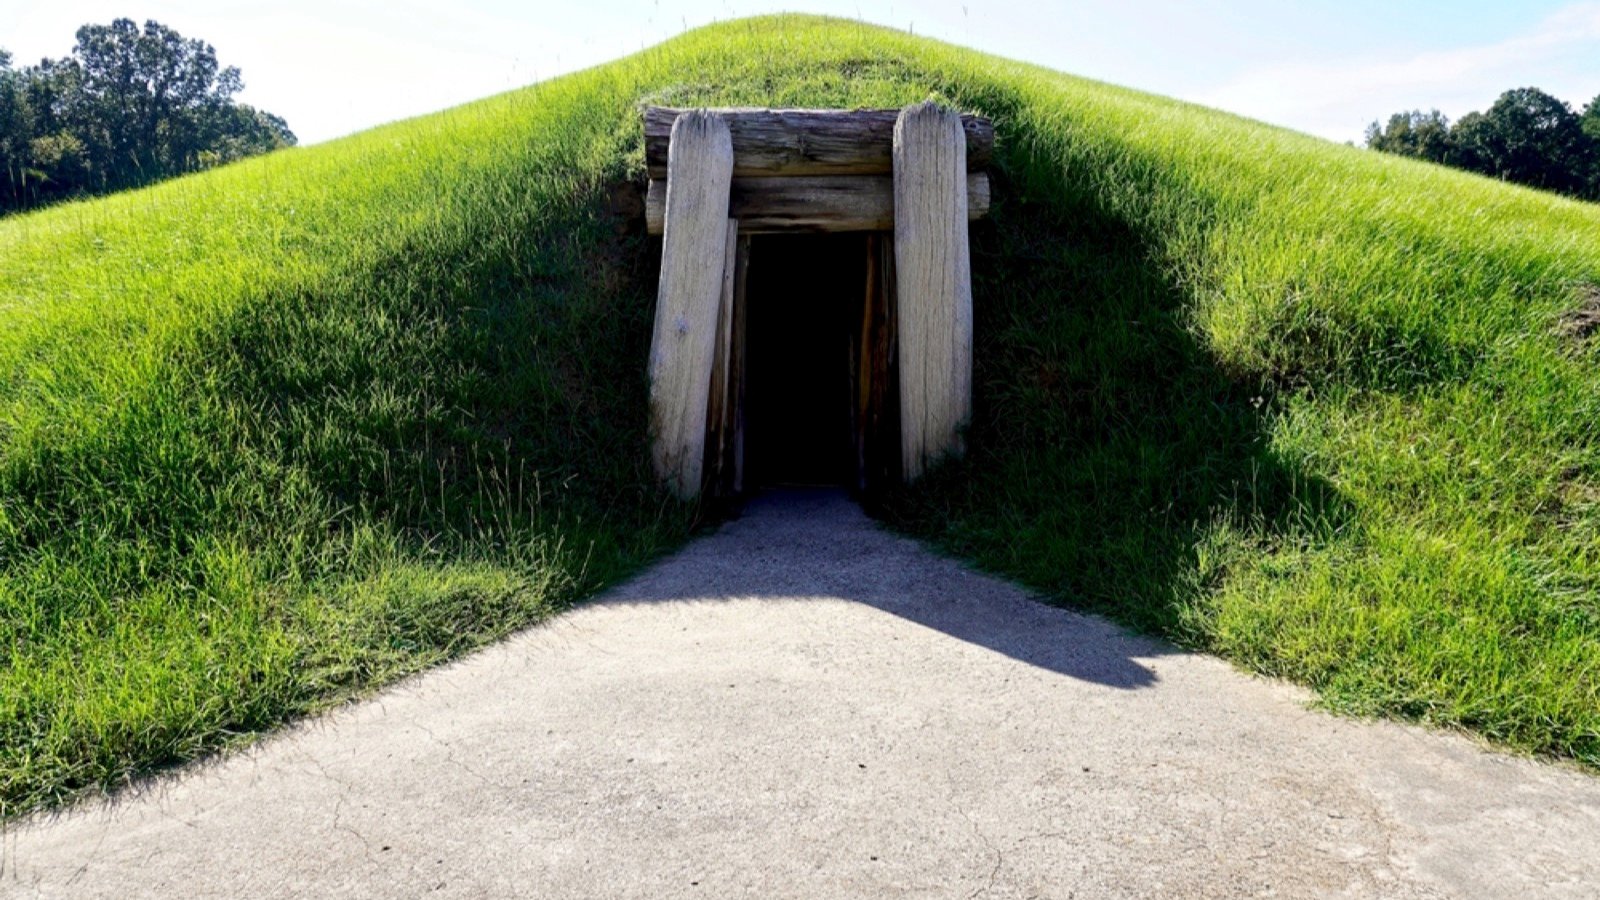 <p>Ocmulgee Mounds National Historical Park near Macon boasts “more than 12,000 years of continuous human habitation.” The park has seven mounds on site, with over 2,000 Native American artifacts. Hike the short half-mile for the stunning views from the top of the Great Temple Mound.</p>